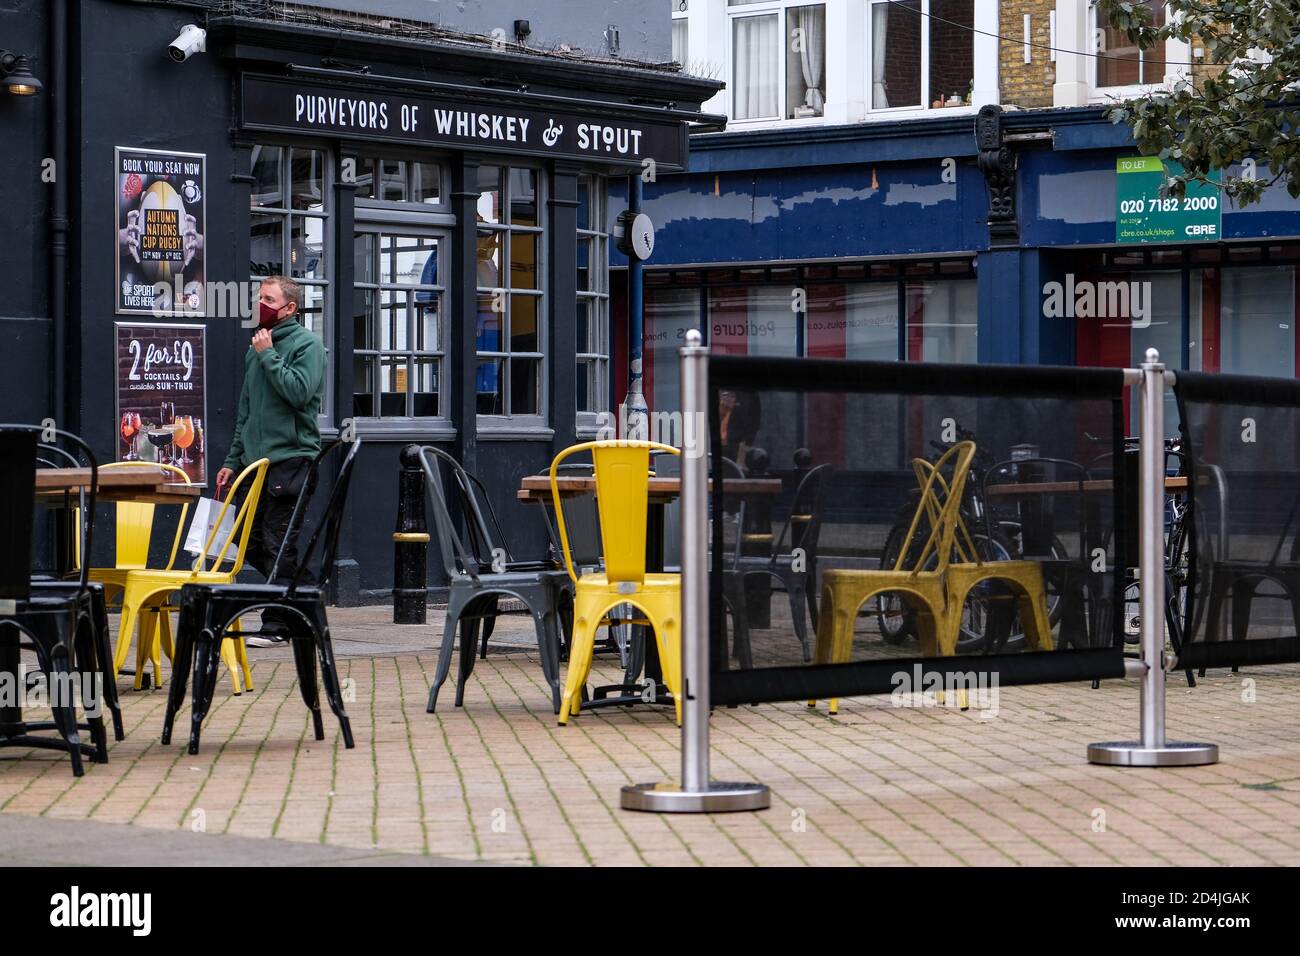 London UK October 09 2020, O’Neils Pub Hospitality Chain Business With No Customers In Ourside Seating Area Amid COVID-19 Pandemic Stock Photo